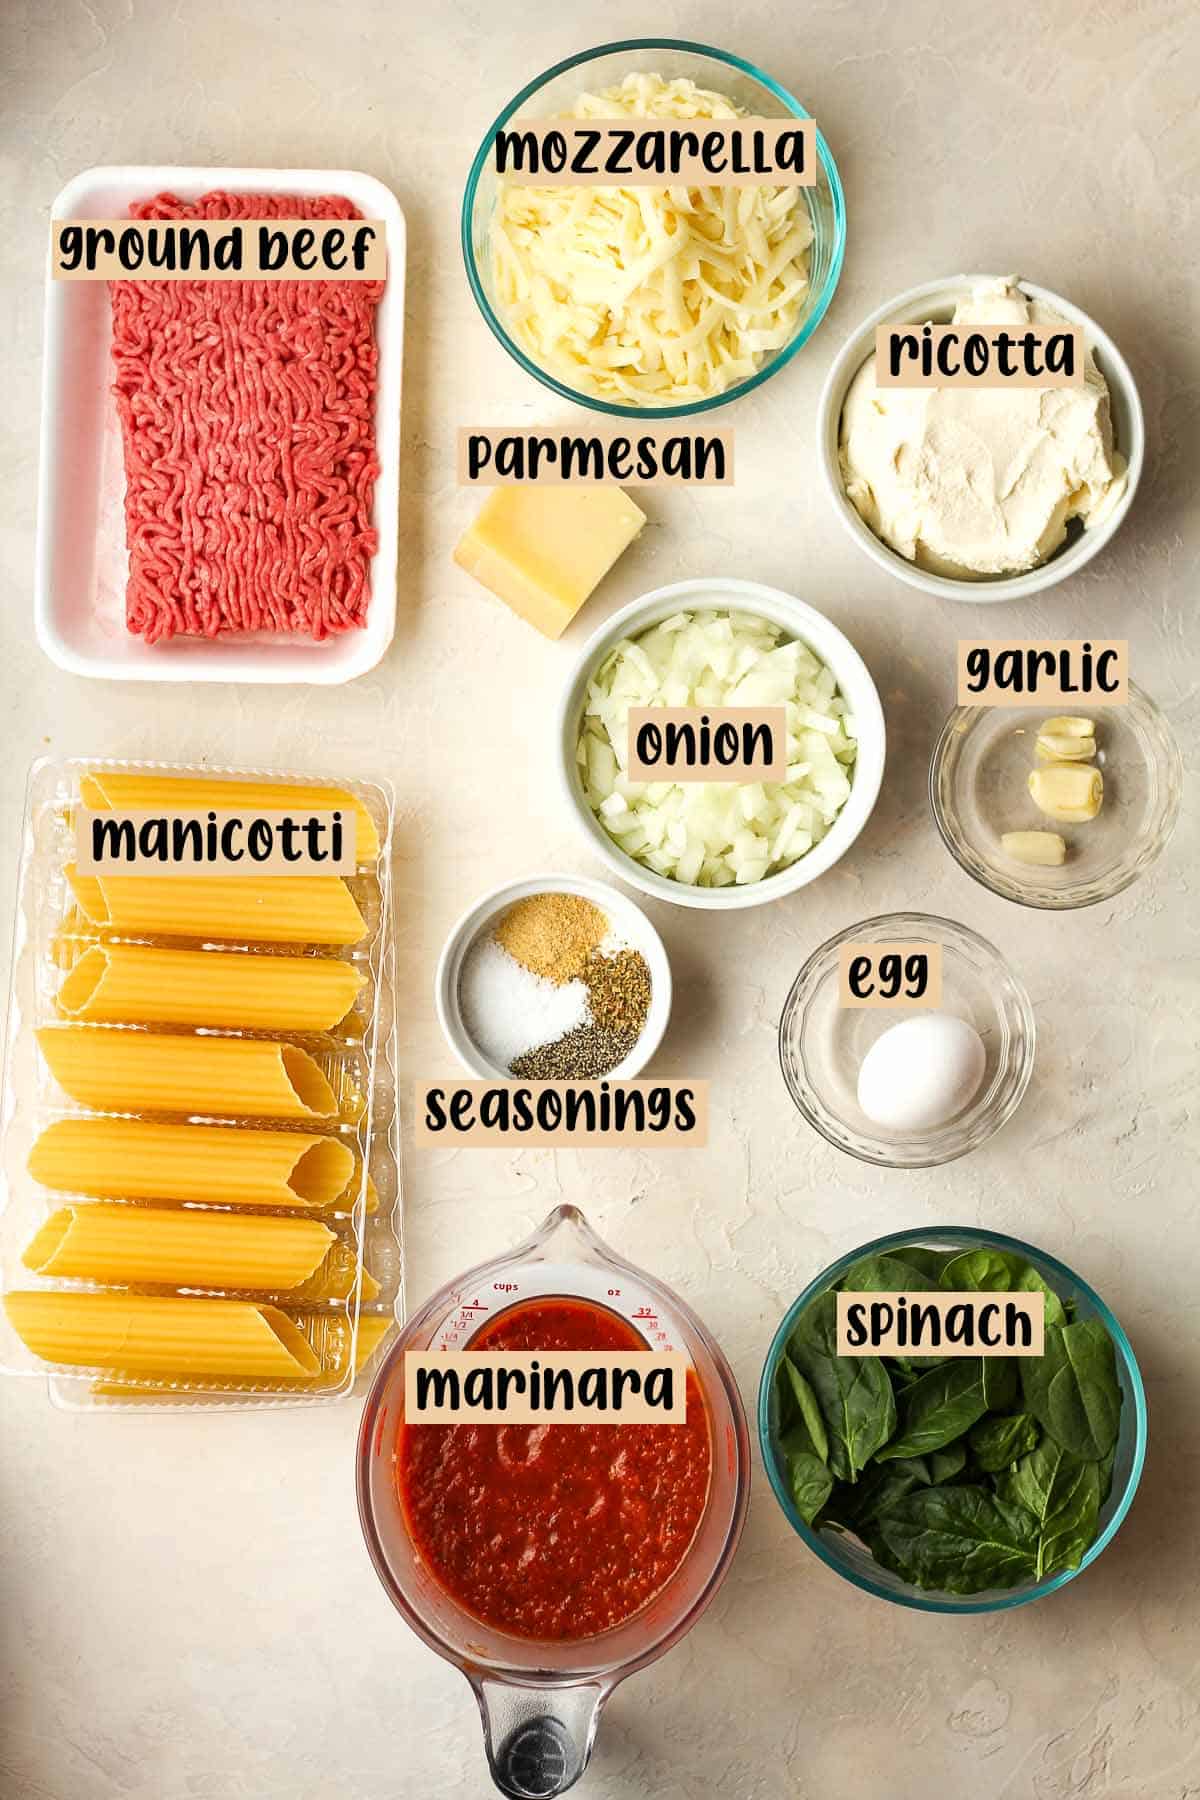 Labeled ingredients for the stuffed manicotti.